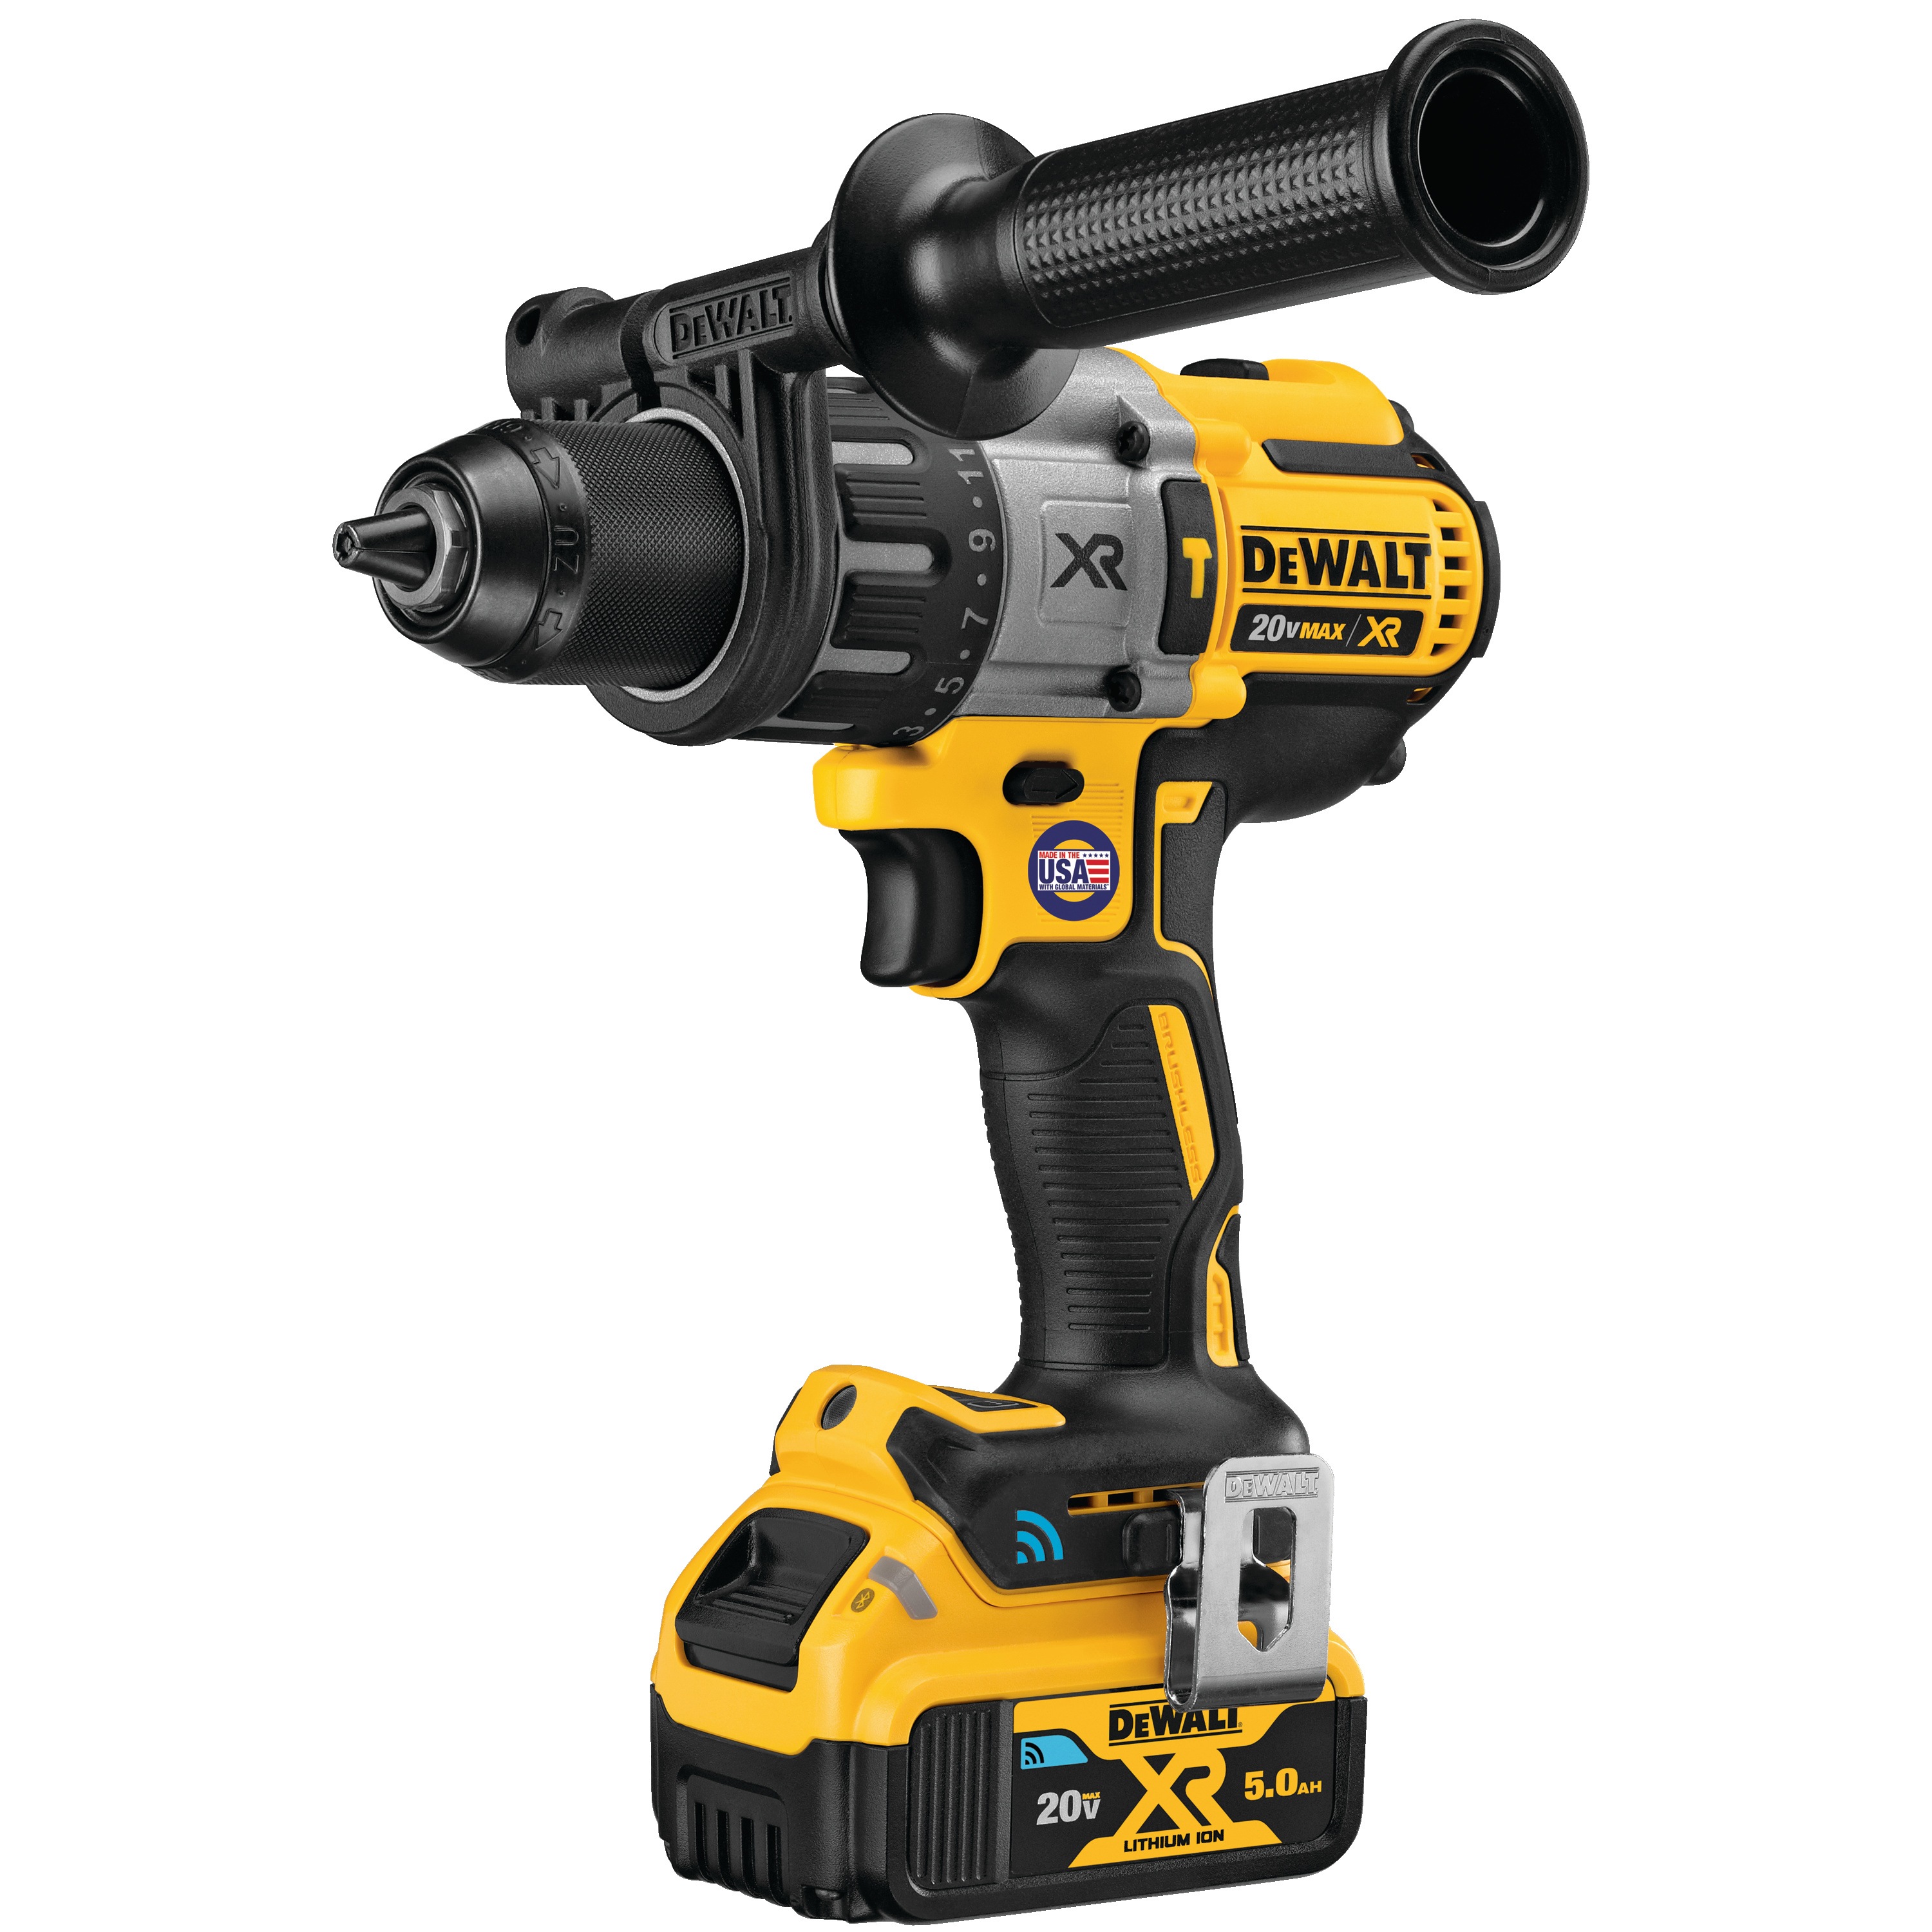 DEWALT - 20V MAX 12 in XR Brushless Cordless Hammer DrillDriver Kit with Integrated Bluetooth and Tool Connect Batteries - DCD997CP2BT